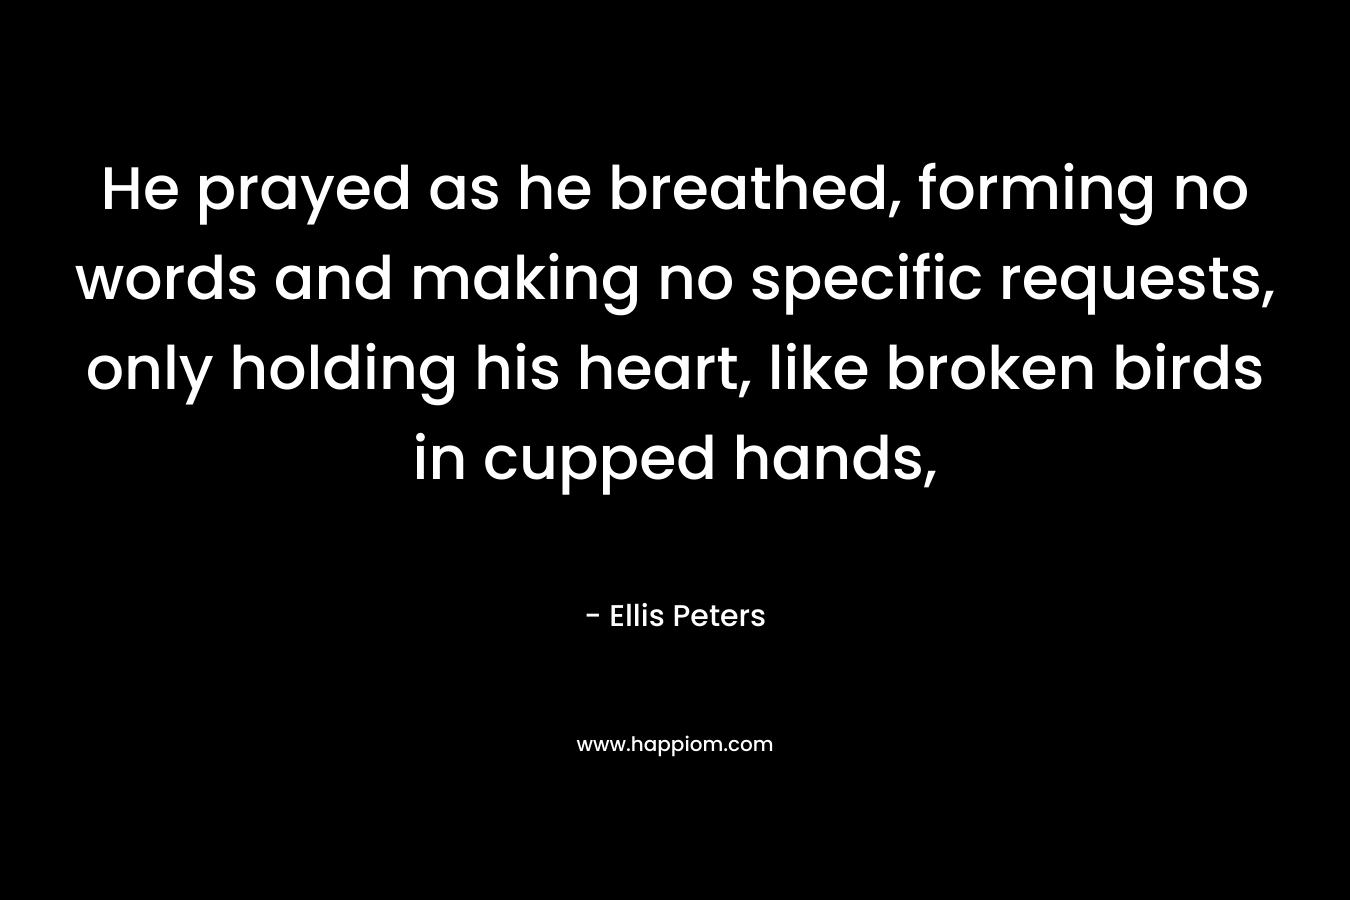 He prayed as he breathed, forming no words and making no specific requests, only holding his heart, like broken birds in cupped hands, – Ellis Peters